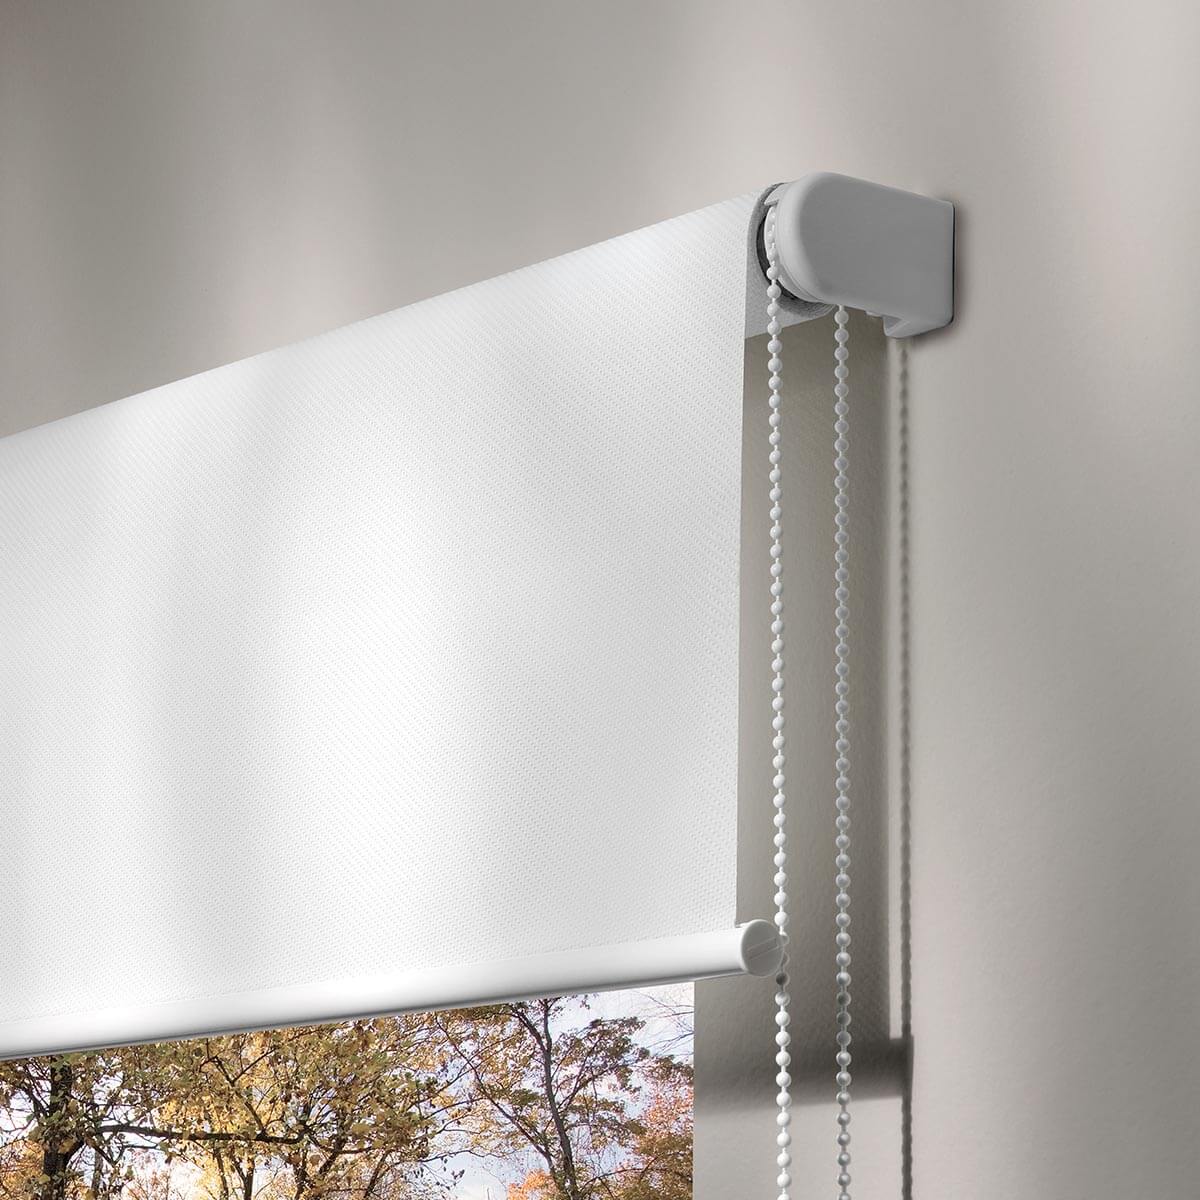 Chain-operated roller blind, Simple , Free hanging. Pronema